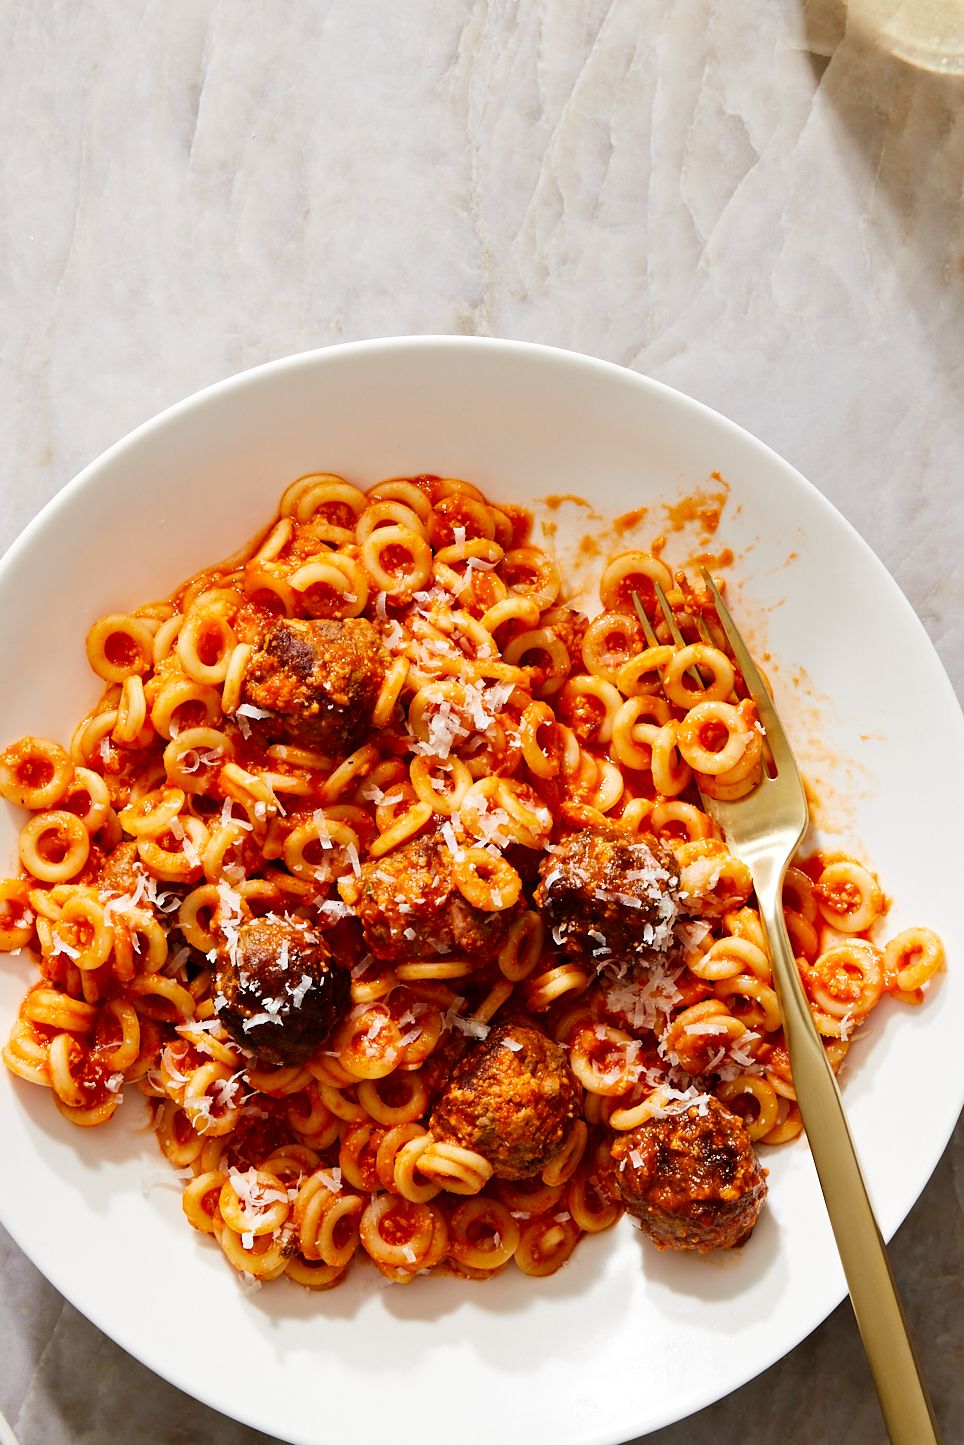 This retro SpaghettiOs dish is making us question everything